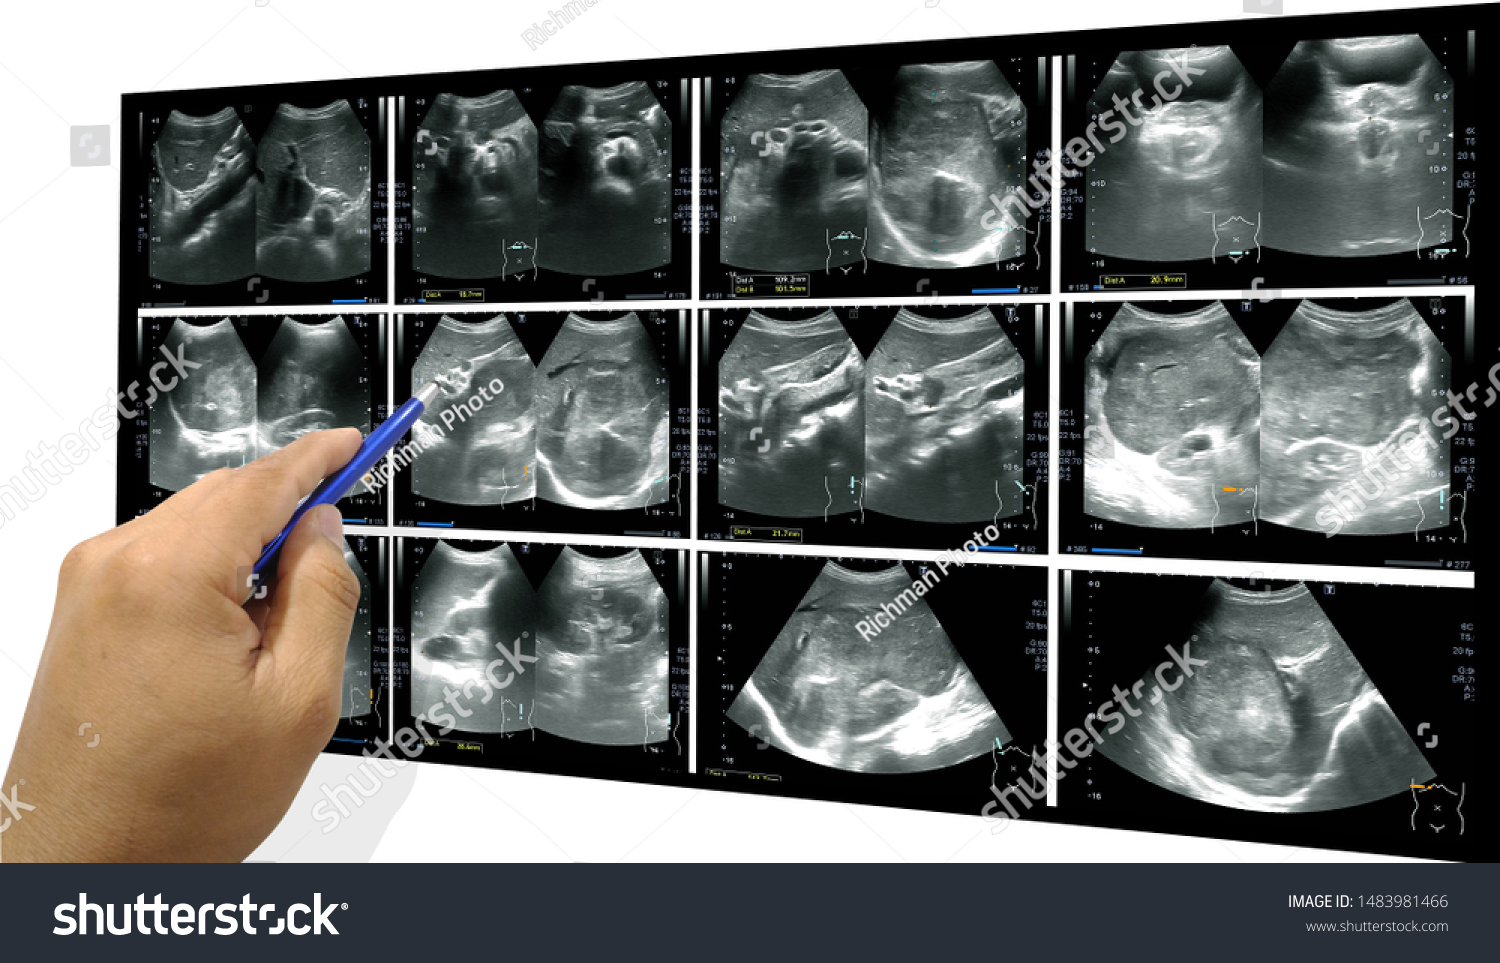 Image result for doctor looking at spleen xray